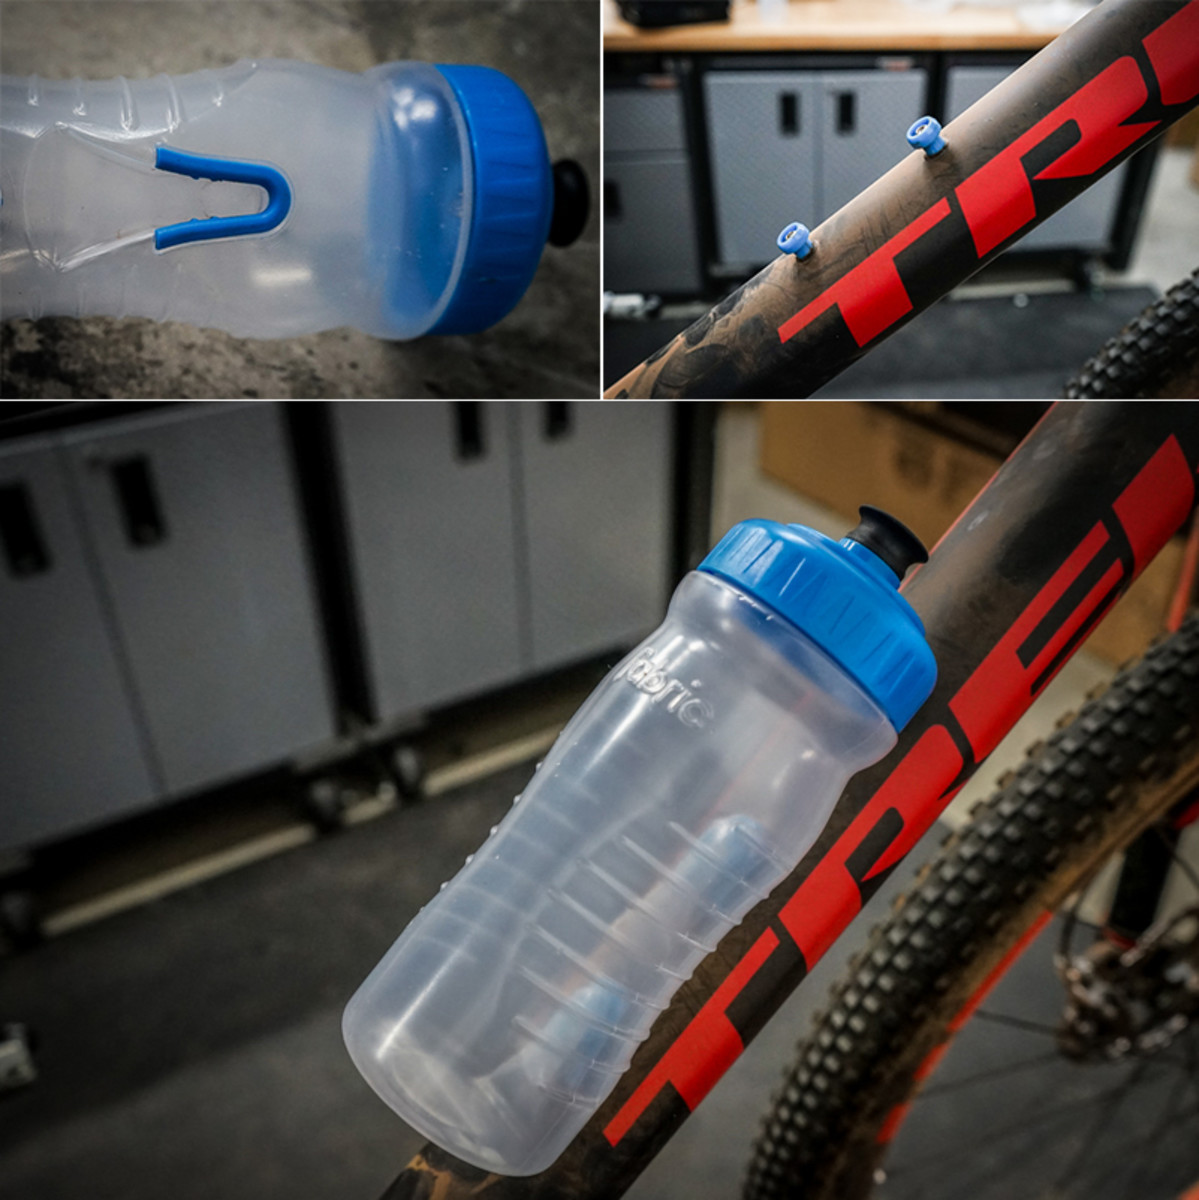 Is Camelbak Podium the BEST water bottle for cycling? - GPX Adventures